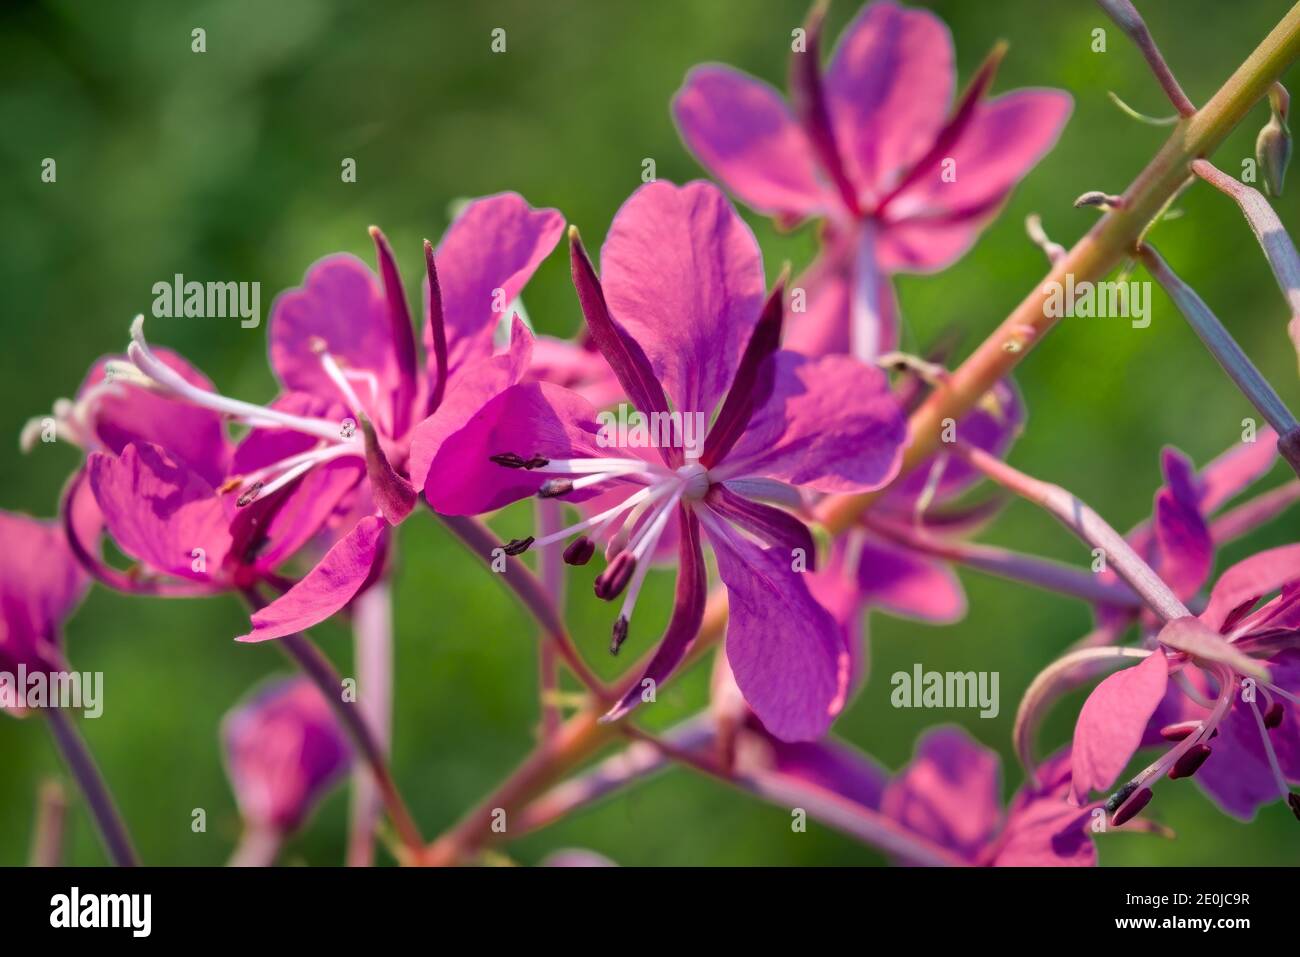 Bright violet fireweed flowers. Bright violet bloom of a fireweed close-up. Stock Photo